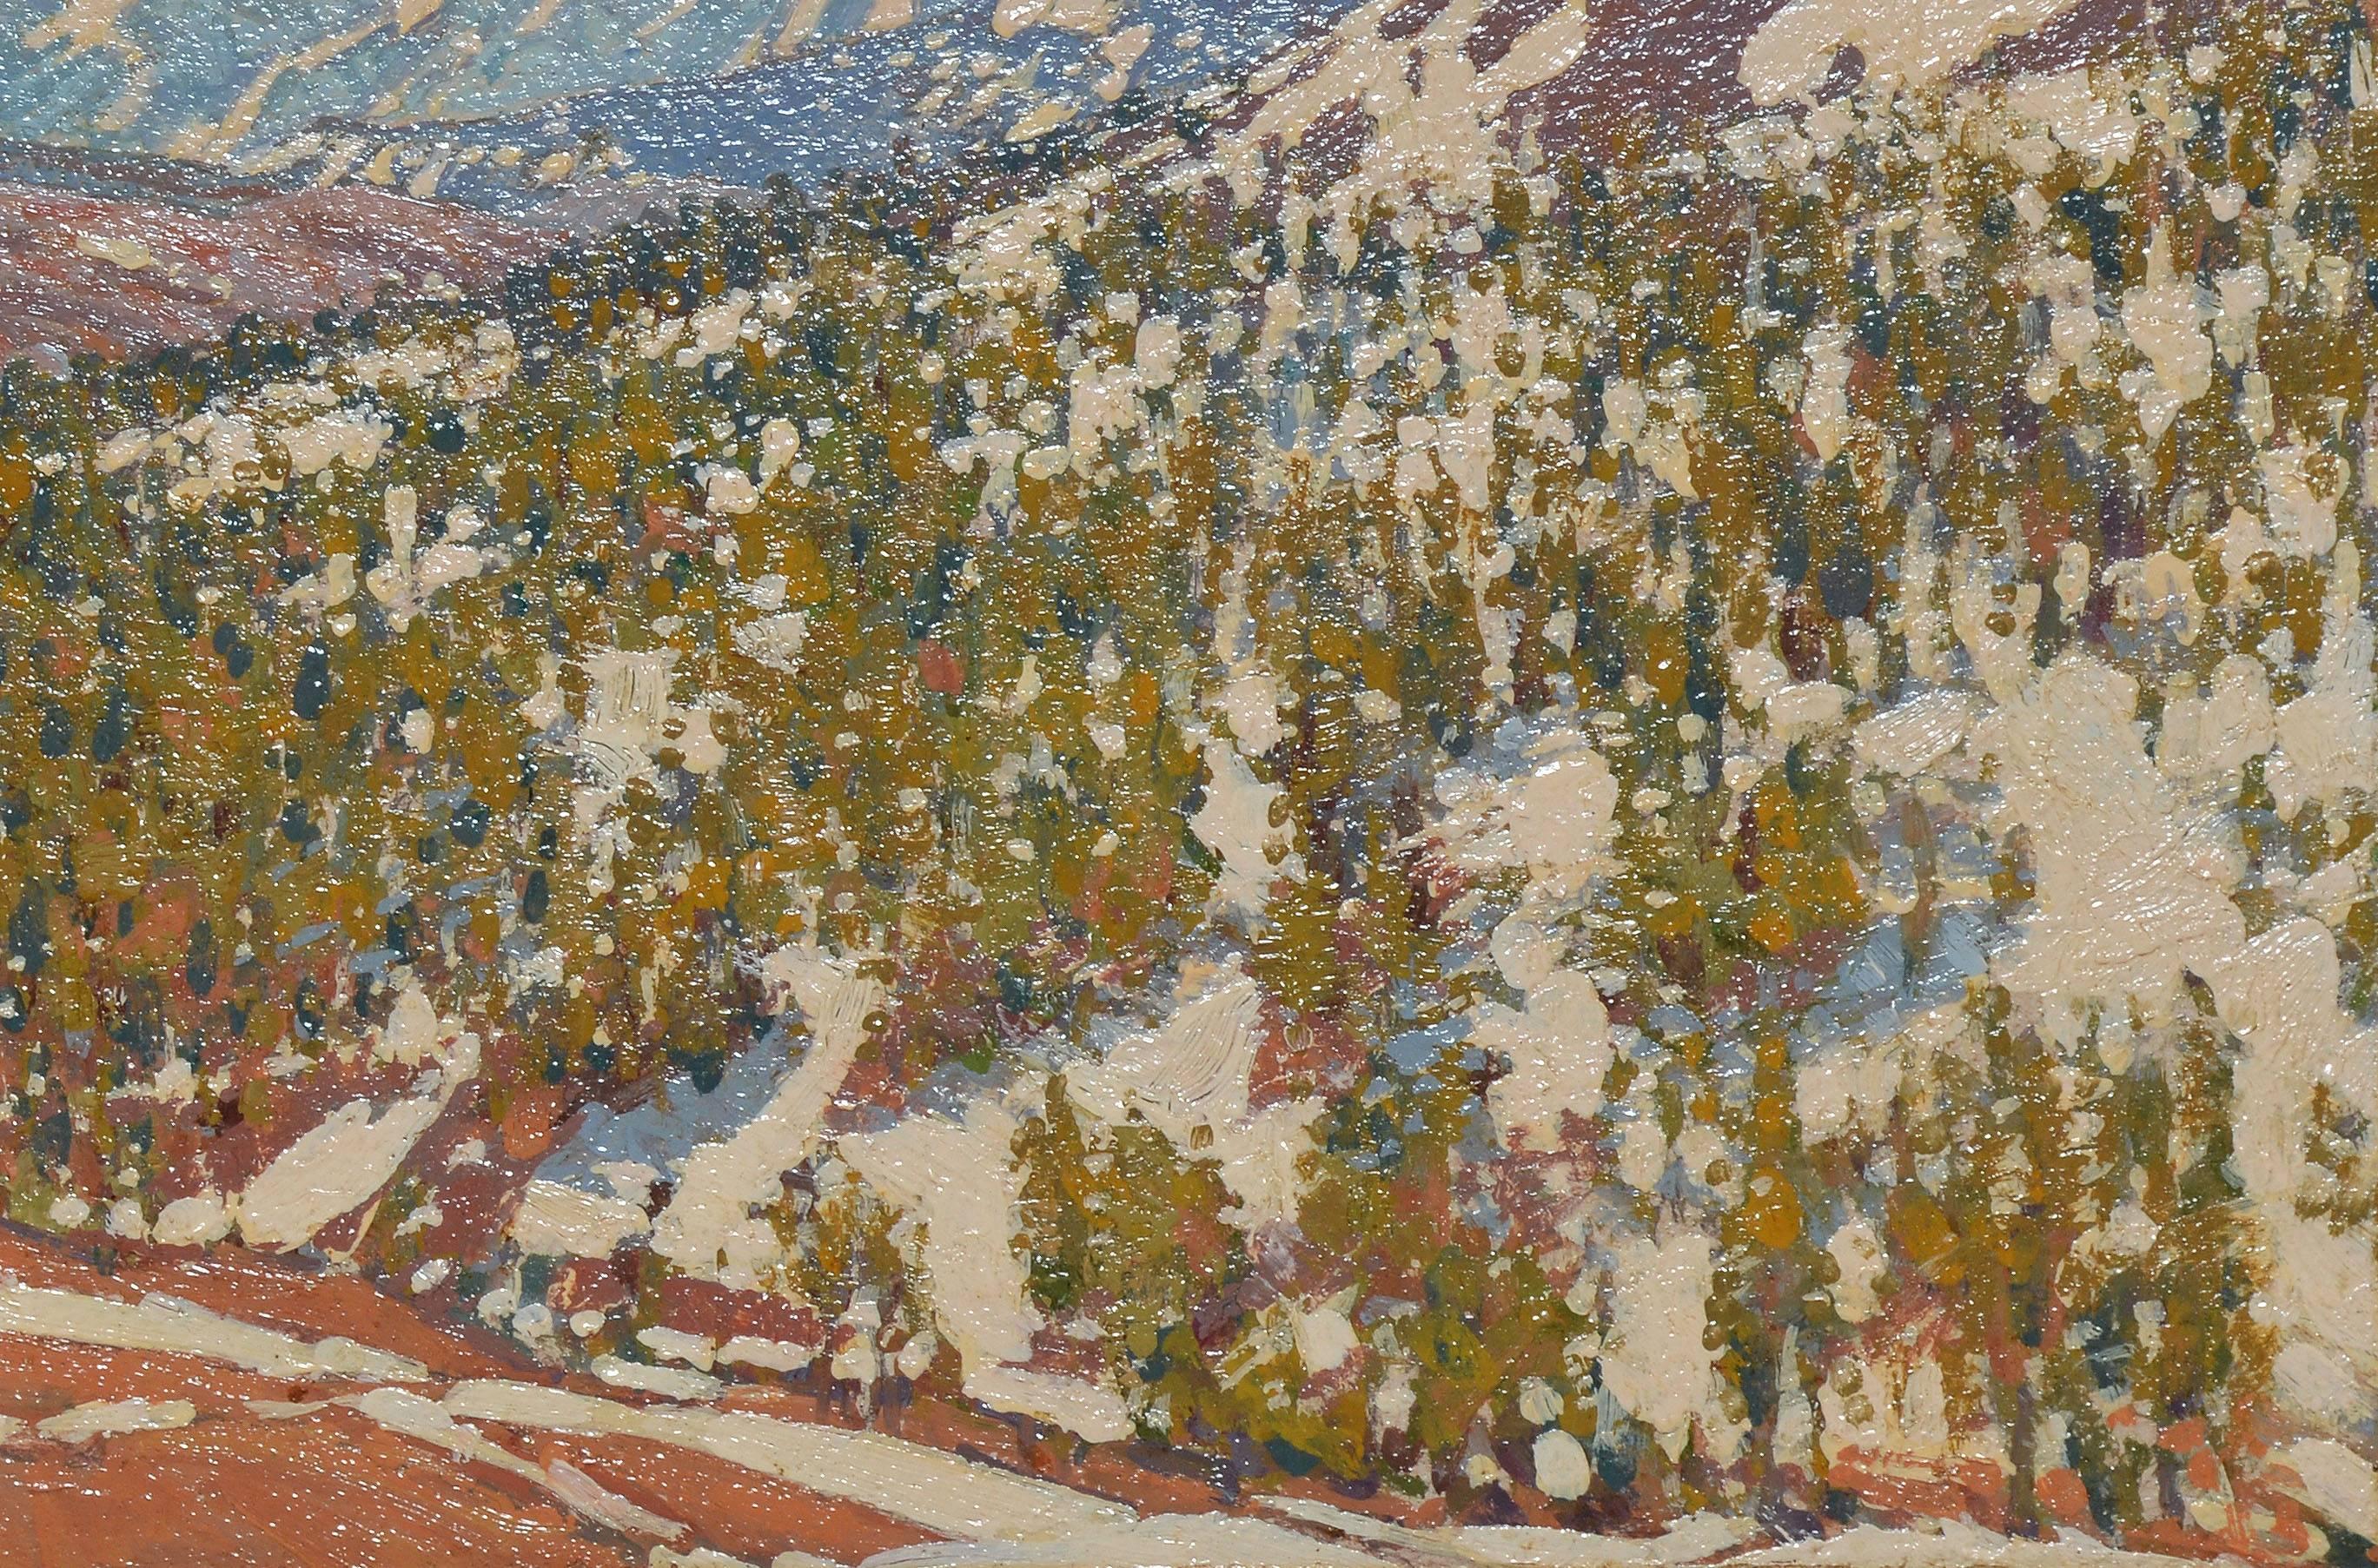 Winter landscape of the Sonora Pass by Irion Shields (1895-1983). Oil on board, circa 1920. Signed on verso only.. Displayed in a giltwood frame, hanging wire included. Image size, 10